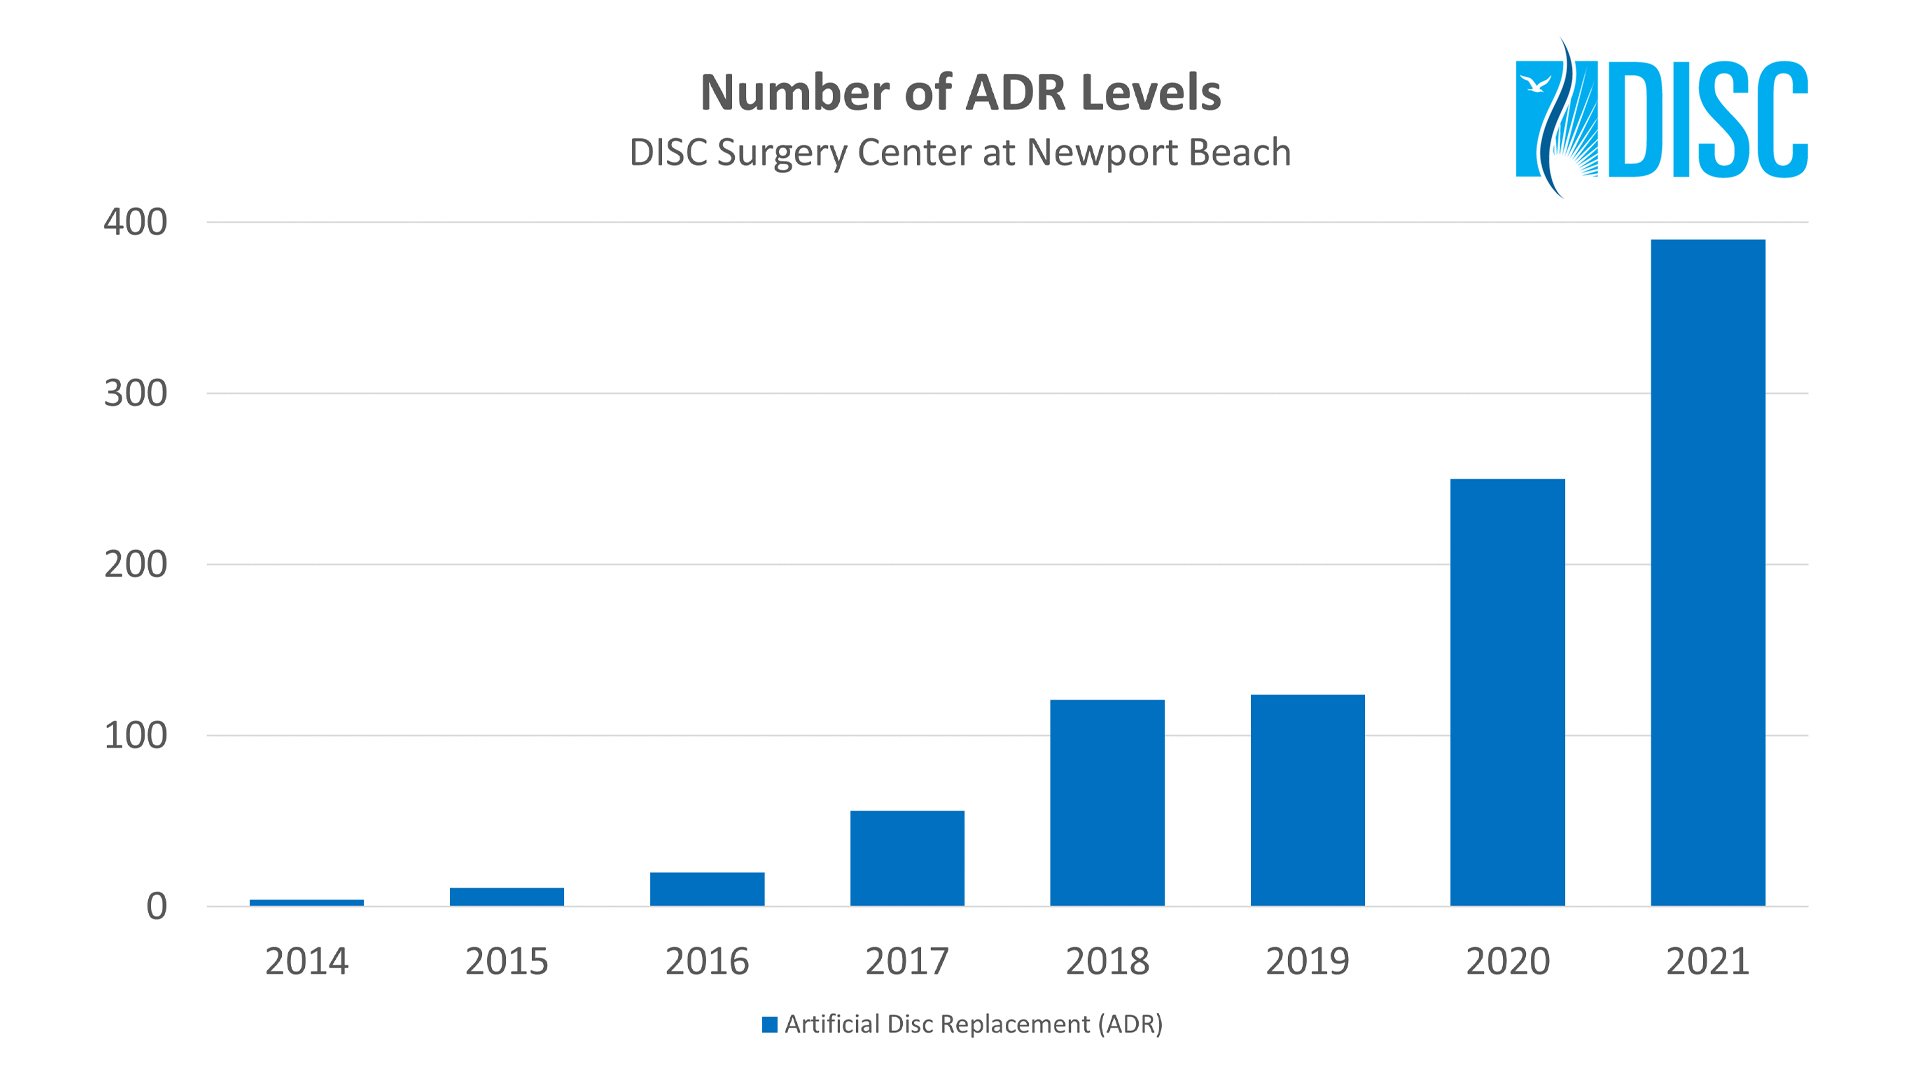 Growth Chart: DISC's Number of ADR Levels by Year